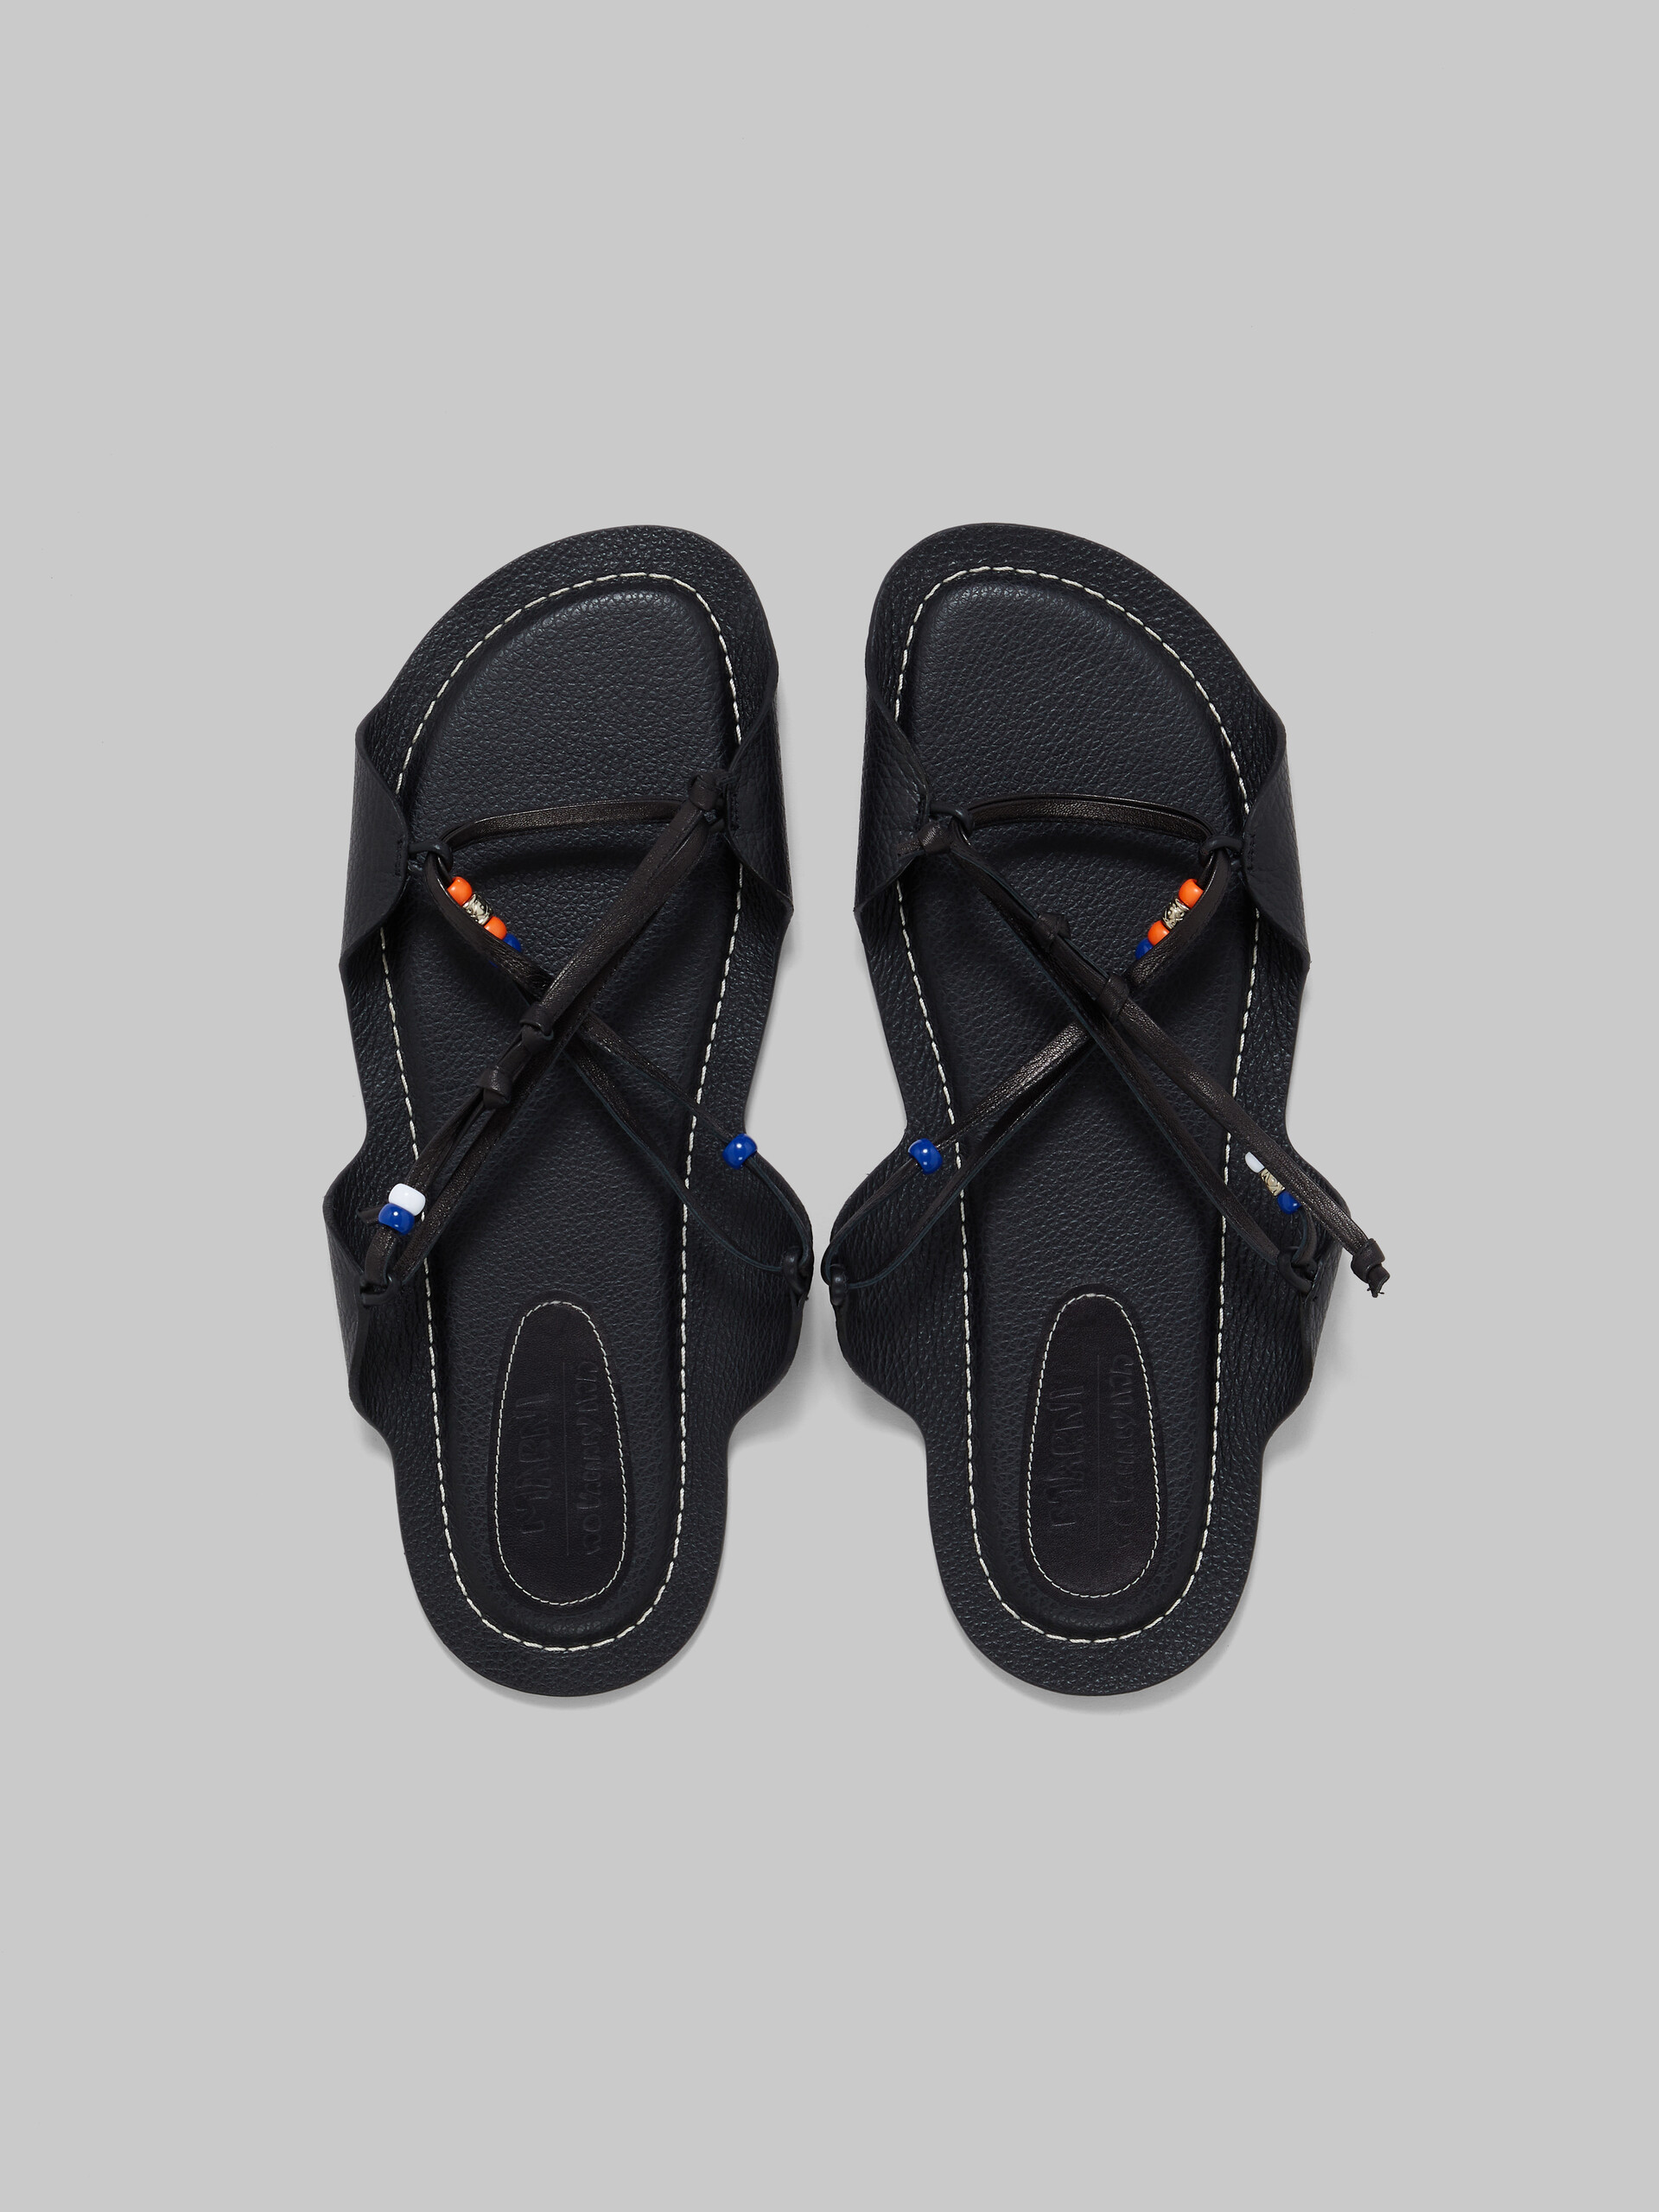 Marni x No Vacancy Inn - Black leather sandals with beads - Sandals - Image 4